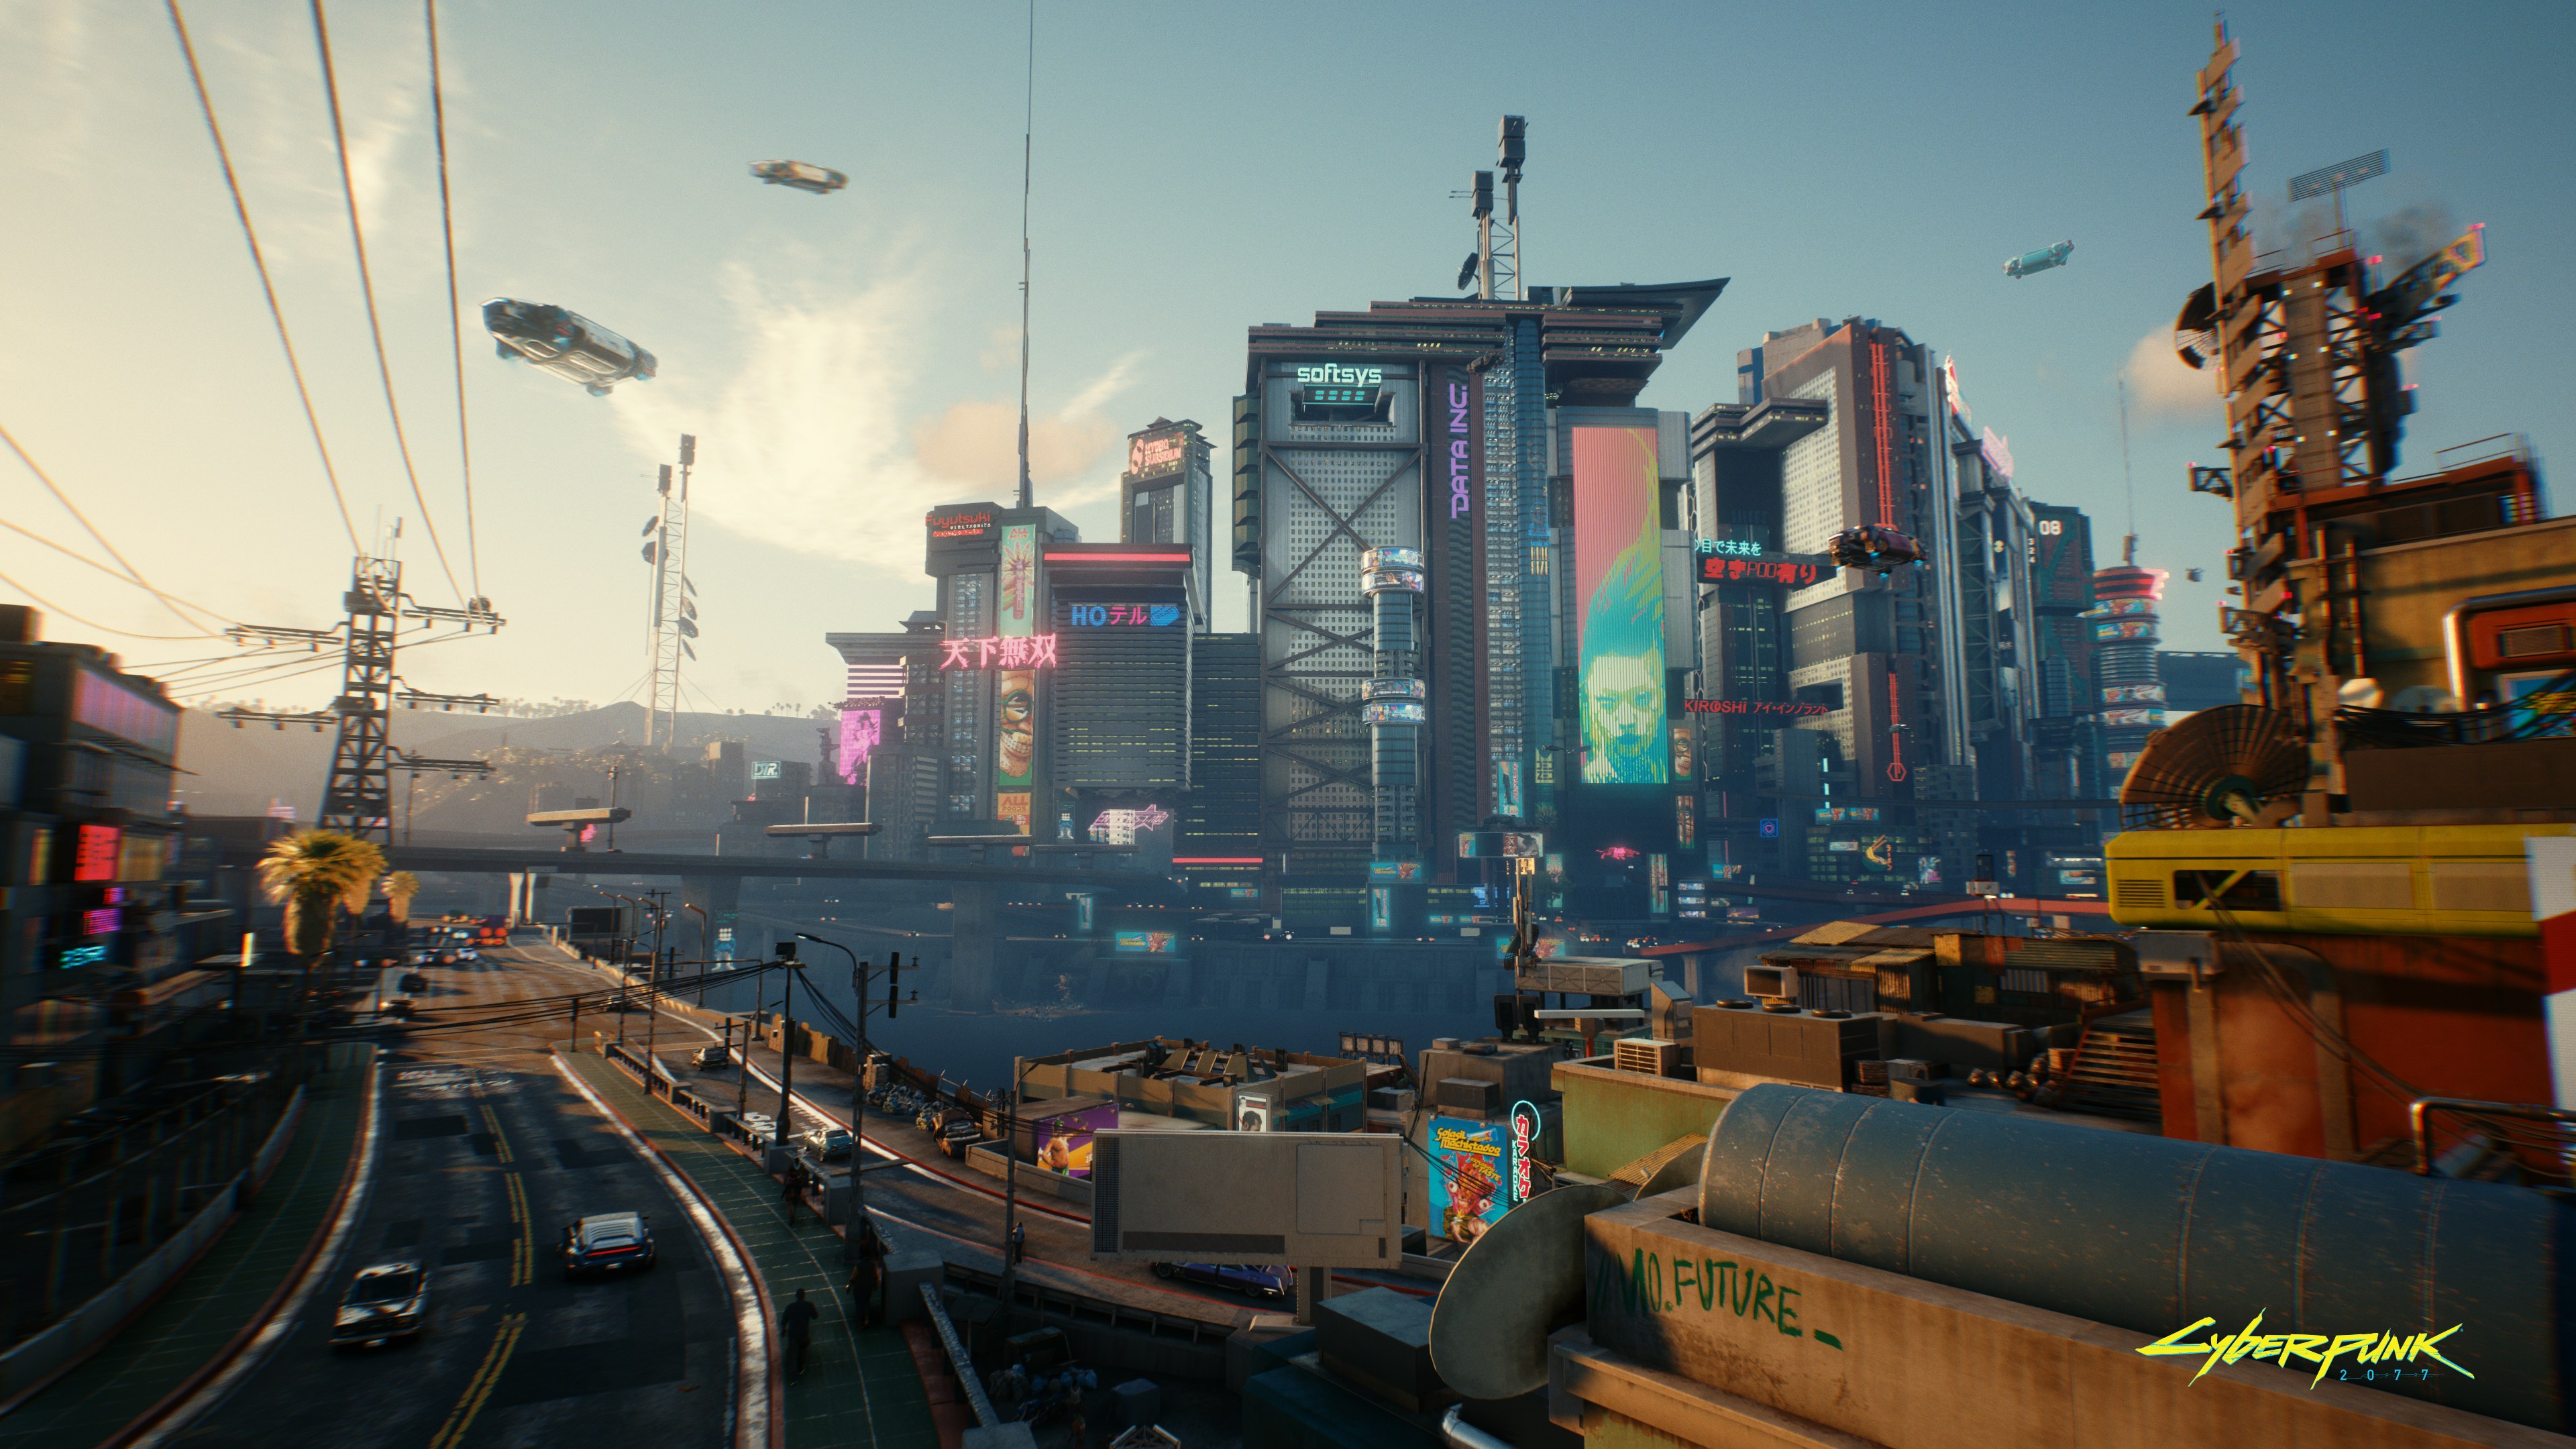 Cyberpunk 2077. All images courtesy of the game's creator